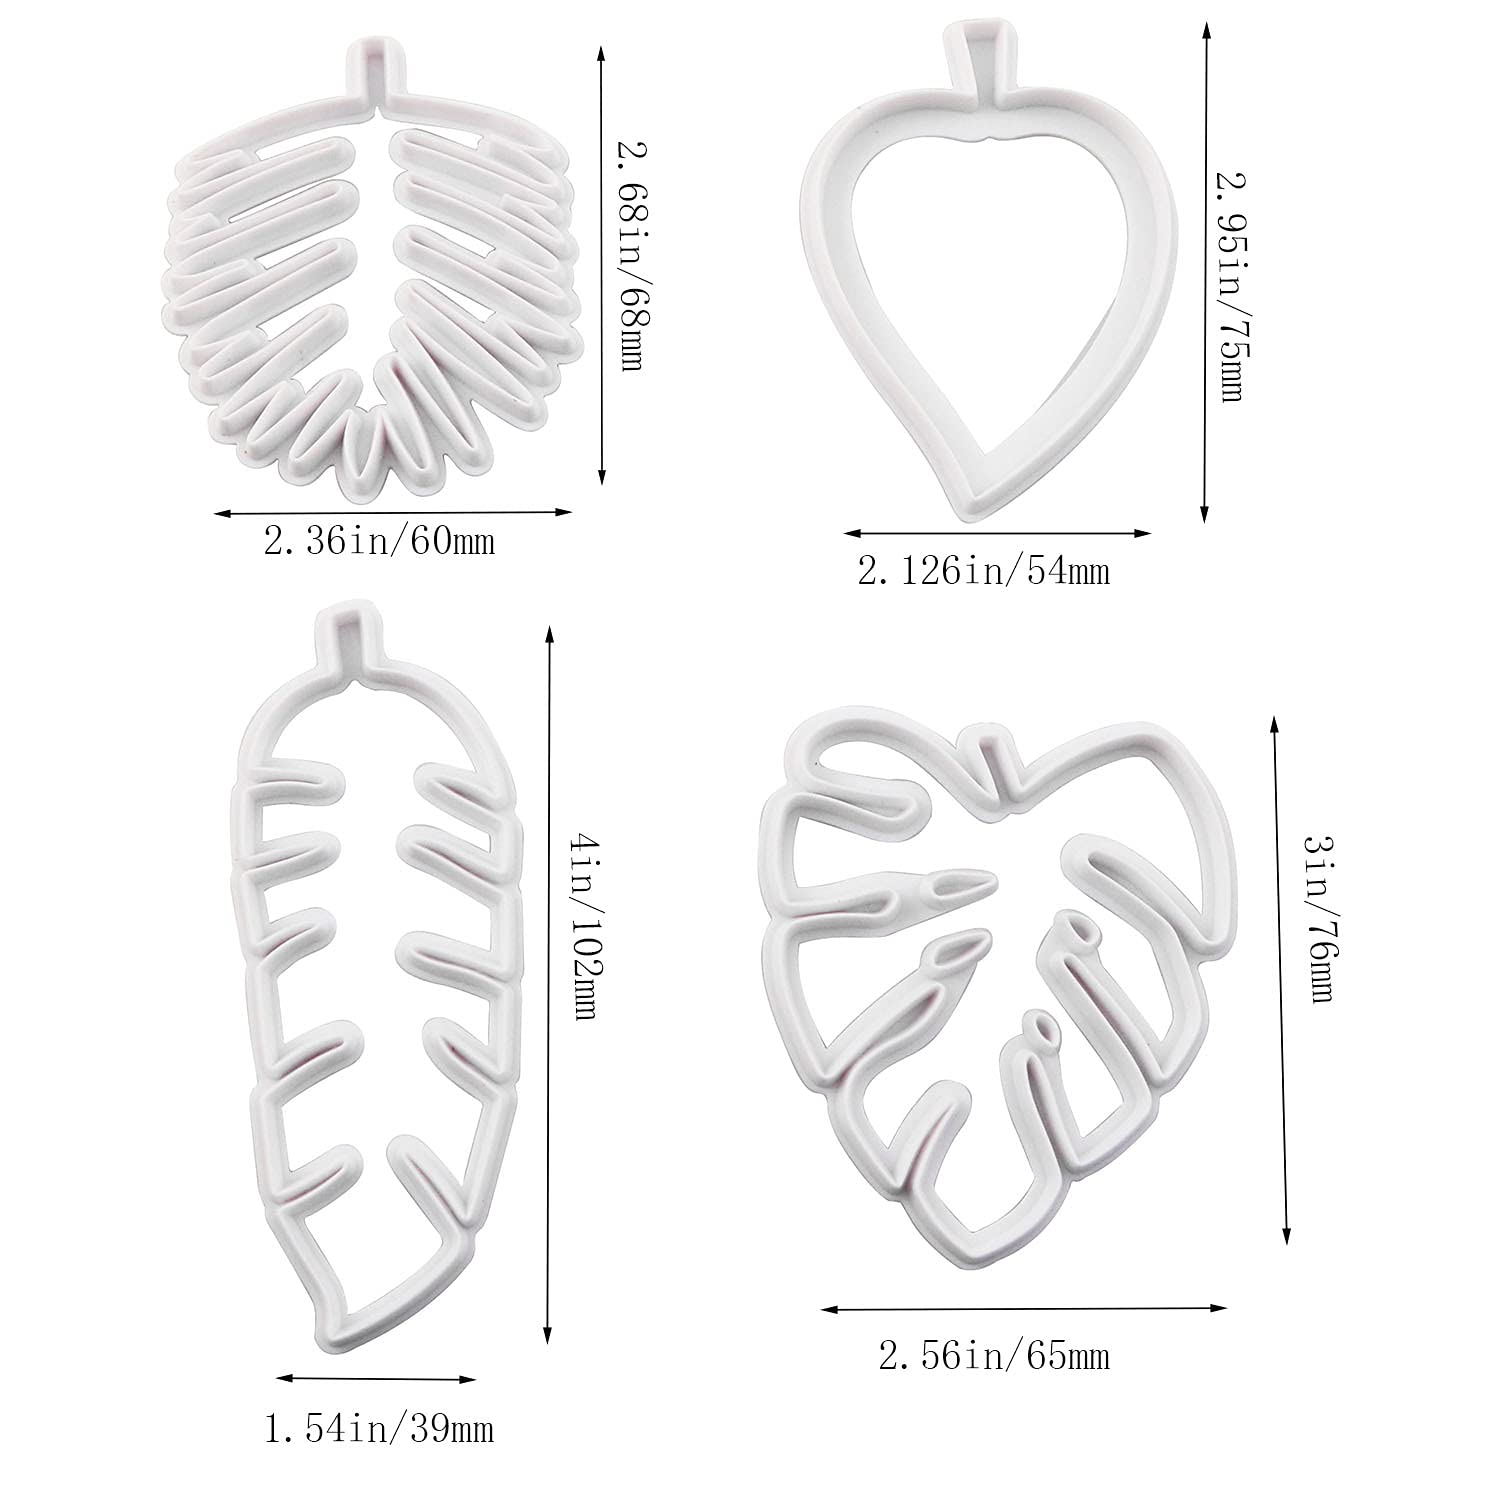 JCBIZ 1Set Tropical Leaf Cookie Cutter Embossing die, Hawaiian Palm Leaves Fondant Cutters Set for Gum Paste, Cake Decorating, Sugarcraft Candy